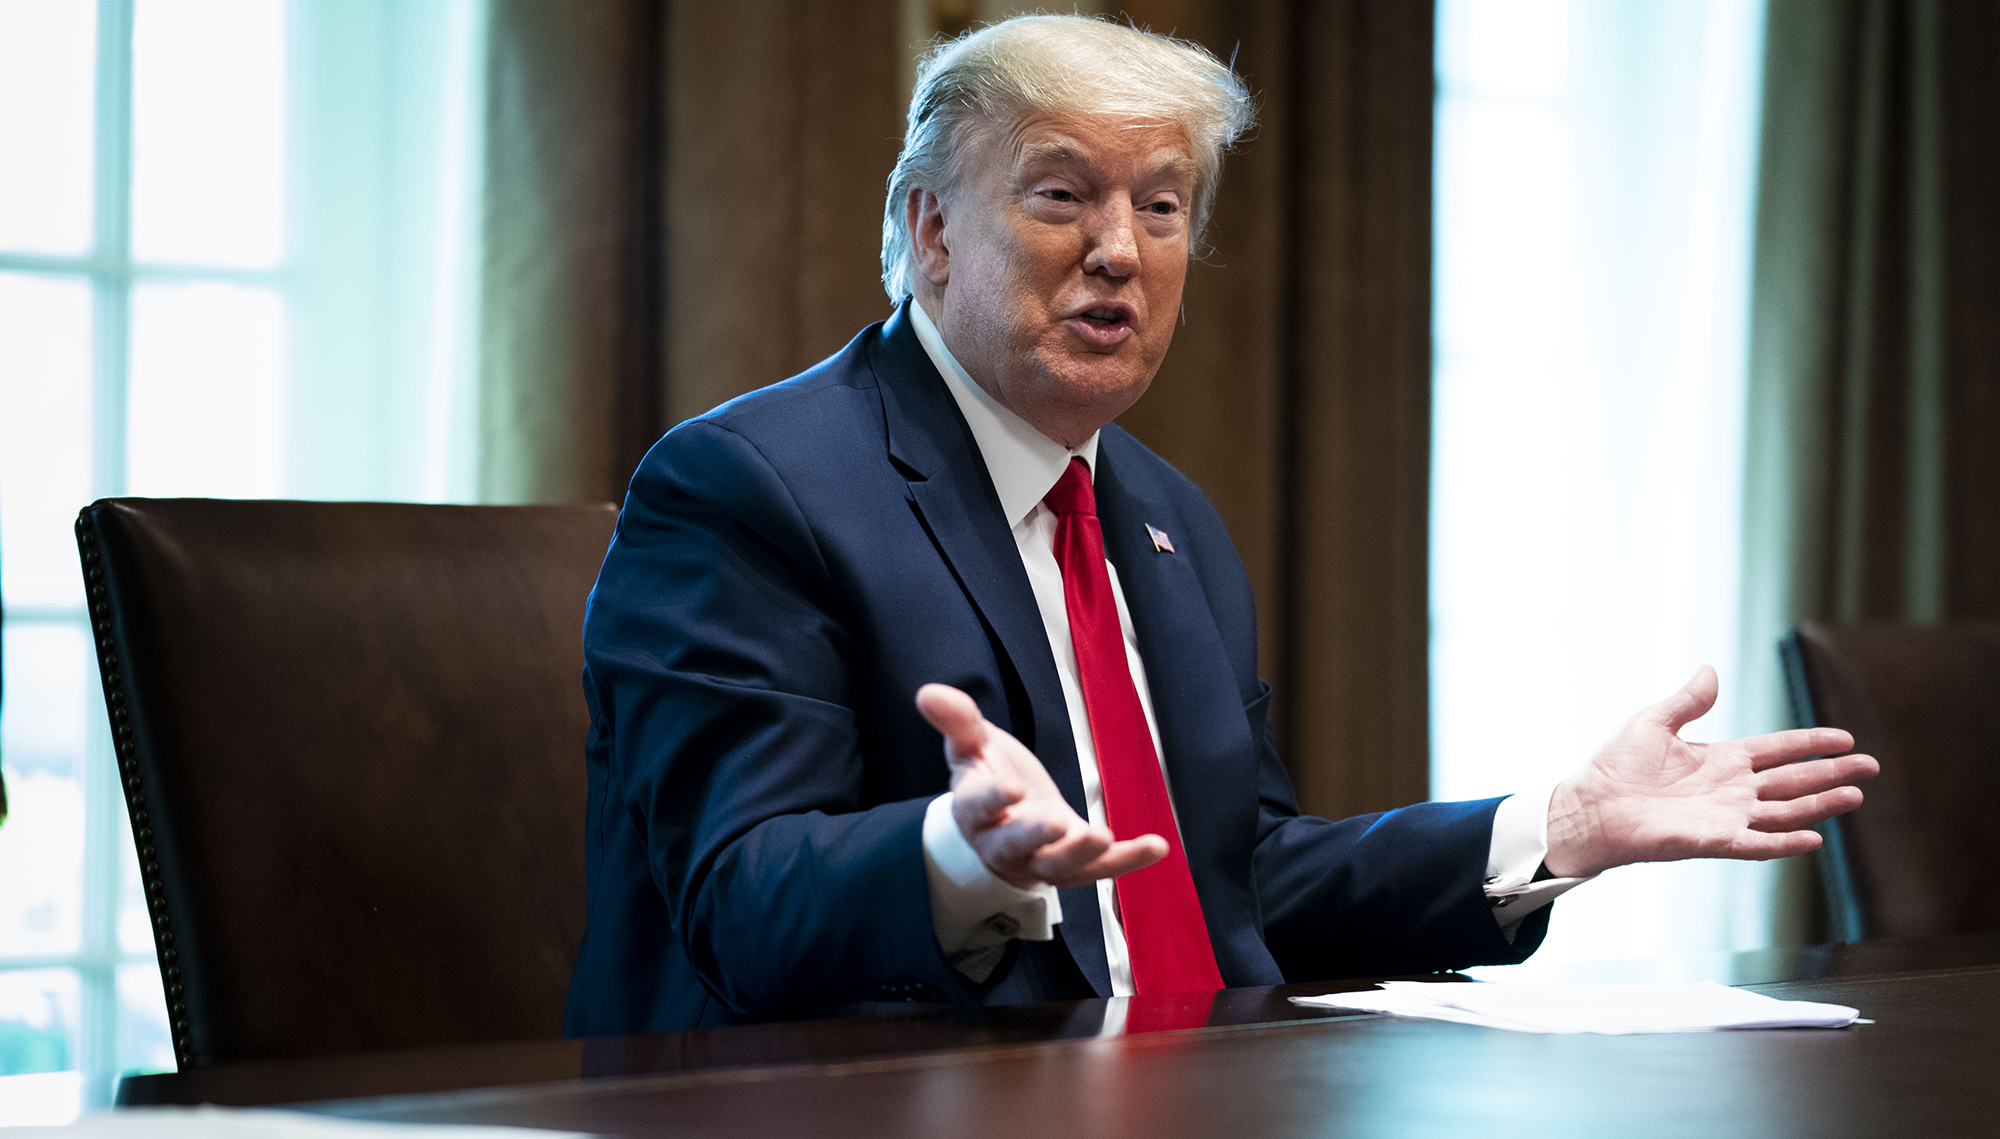 Donald Trump speaks during a meeting with recovered Covid-19 patients in the Cabinet Room of the White House in Washington, D.C. on&nbsp;April 14, 2020.